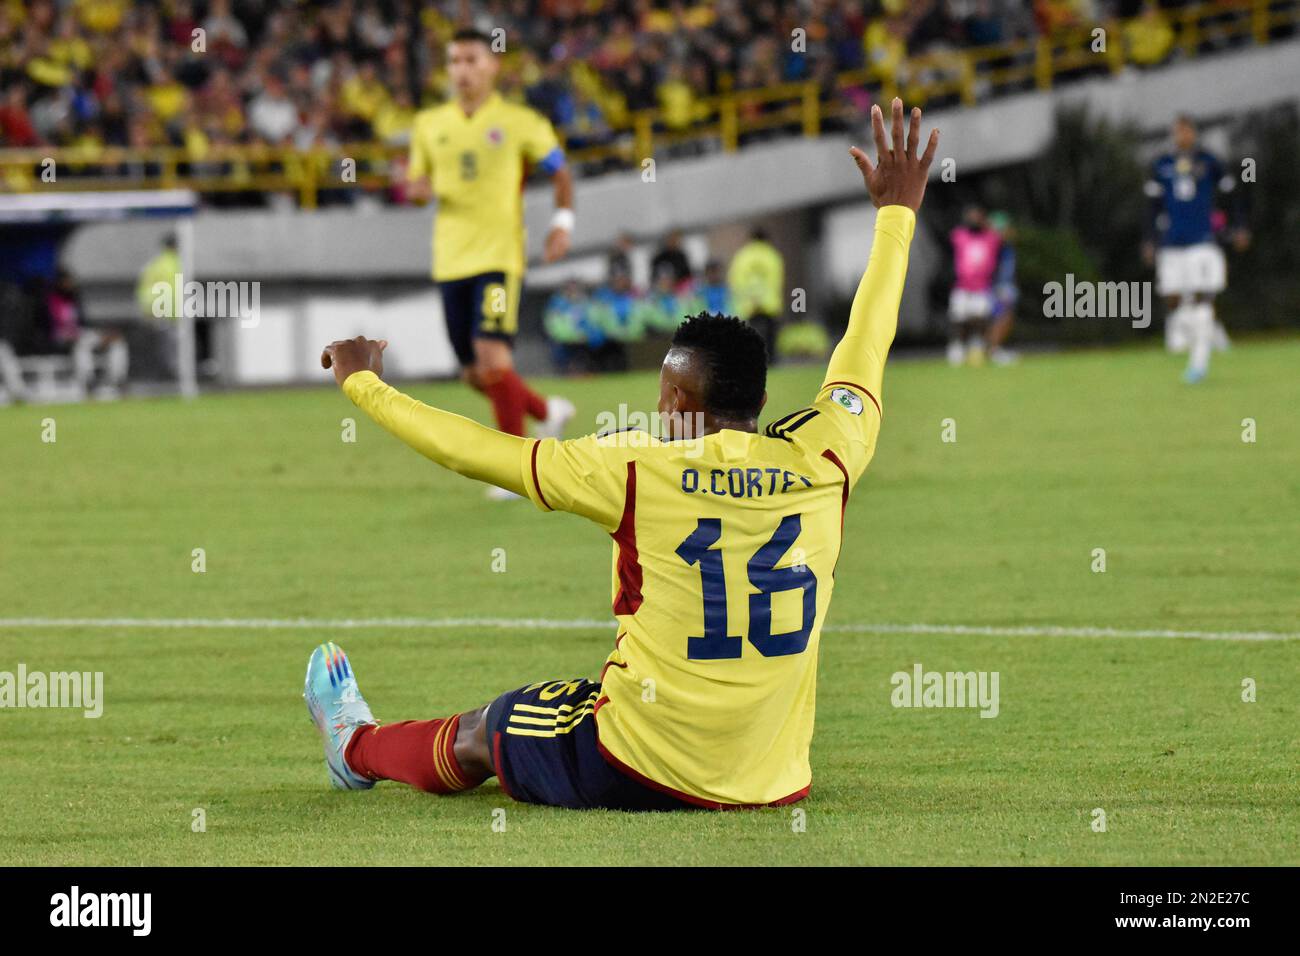 Bogota, Colombia, february 6, 2023. Colombia's Oscar Cortes during the CONMEBOL U-20 tournament match between Brazil (2) and Paraguay (0) in Bogota, Colombia, february 6, 2023. Photo by: Cristian Bayona/Long Visual Press Stock Photo